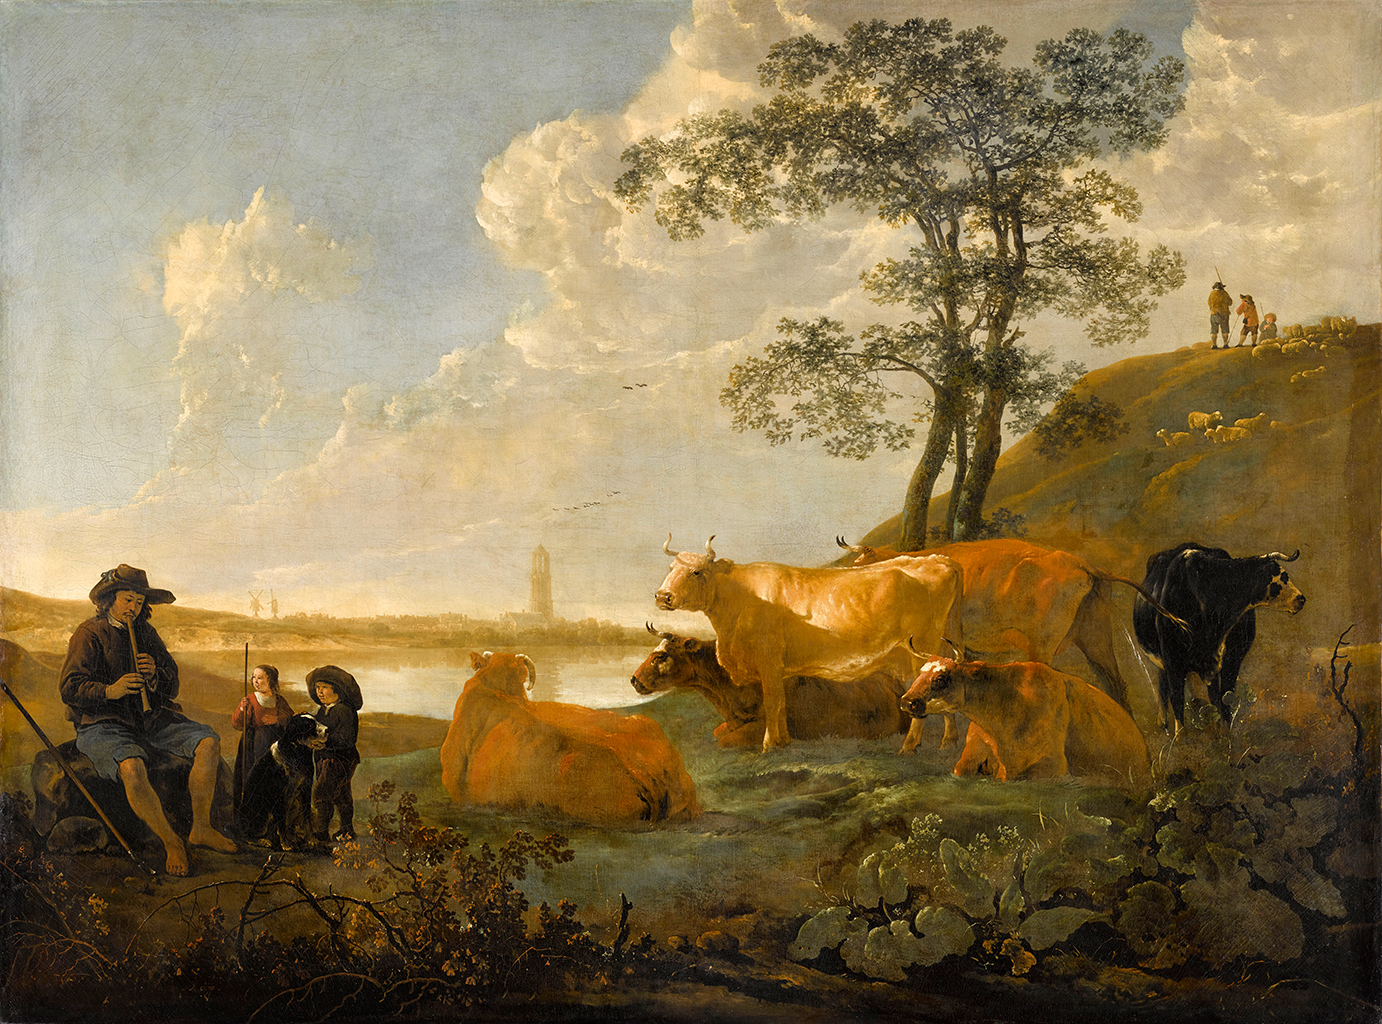 A painting depicting a herd of cattle resting near a two trees and hilly cliff side with a small group standing at the top. On the left side, a man wearing a brown hat and shirt with blue shorts sits on a stack of rocks and plays a wooden shawm instrument. Near him, are two young children with a black and white dog. The little girl holds a long walking stick while the boy stands next to her seemingly patting a dog. Behind them, is a large lake, with another land with a tower standing across it.